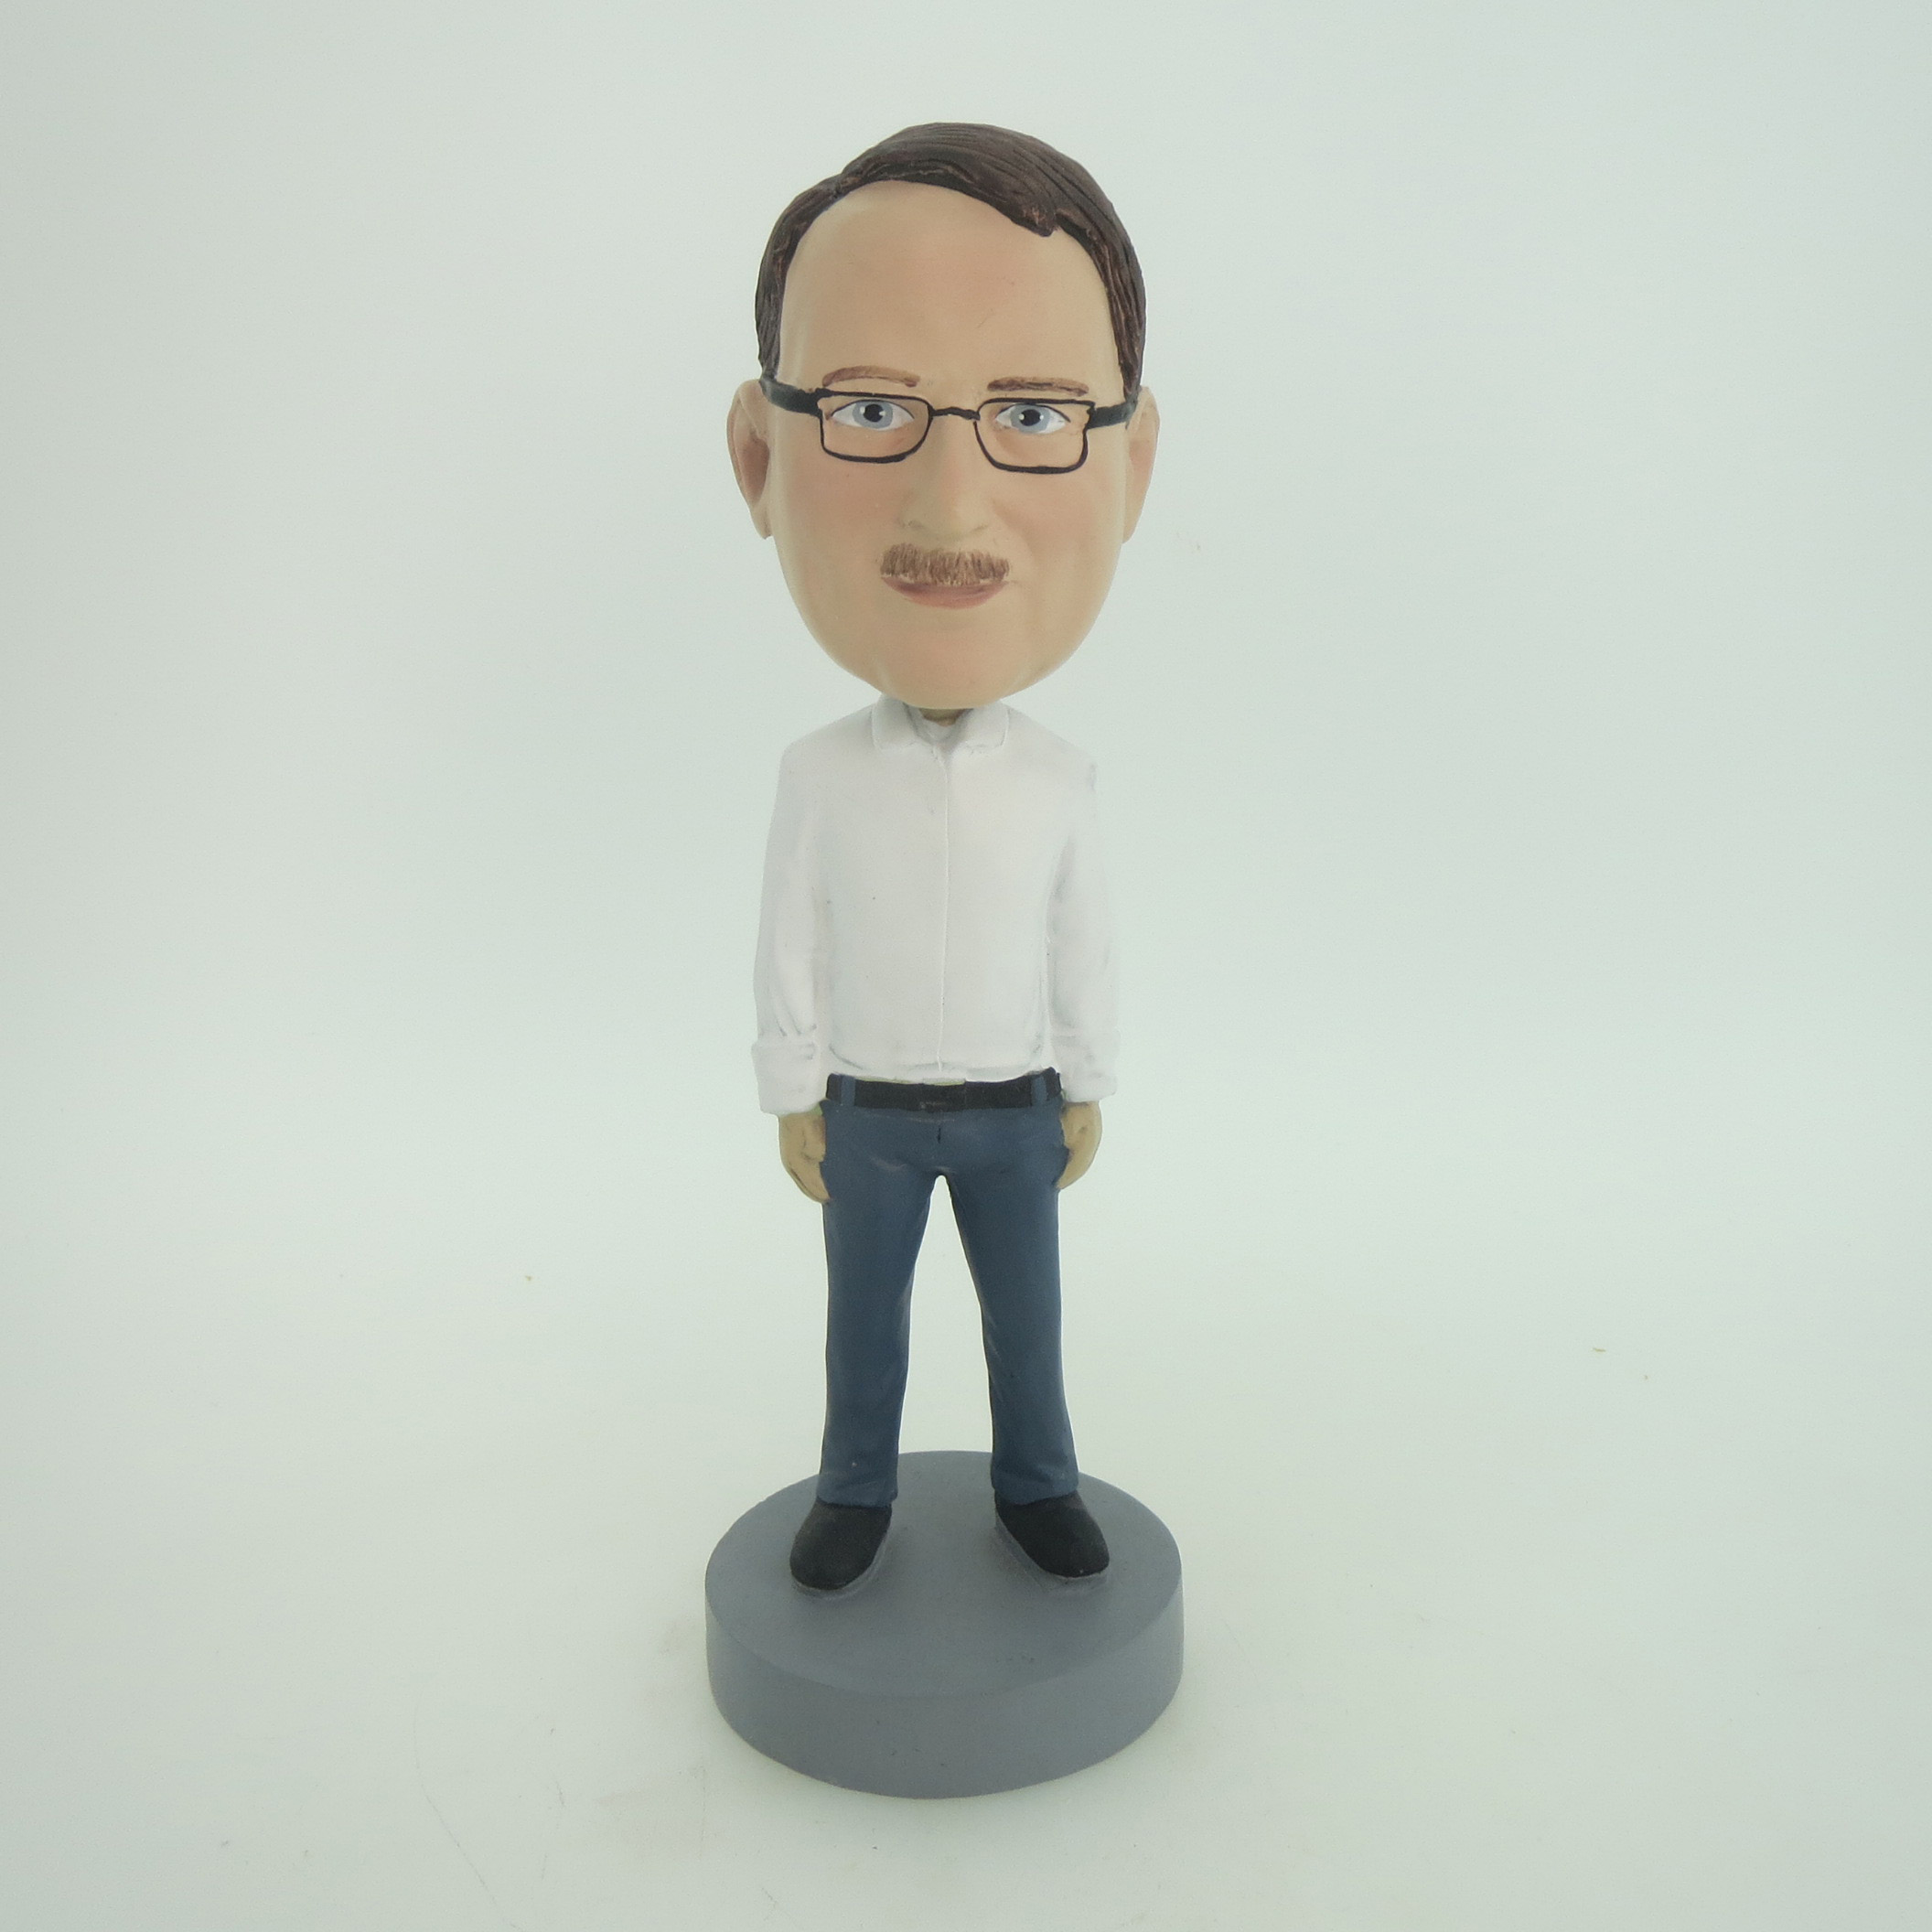 Picture of Custom Bobblehead Doll: Casual Man In White And Blue With Glass